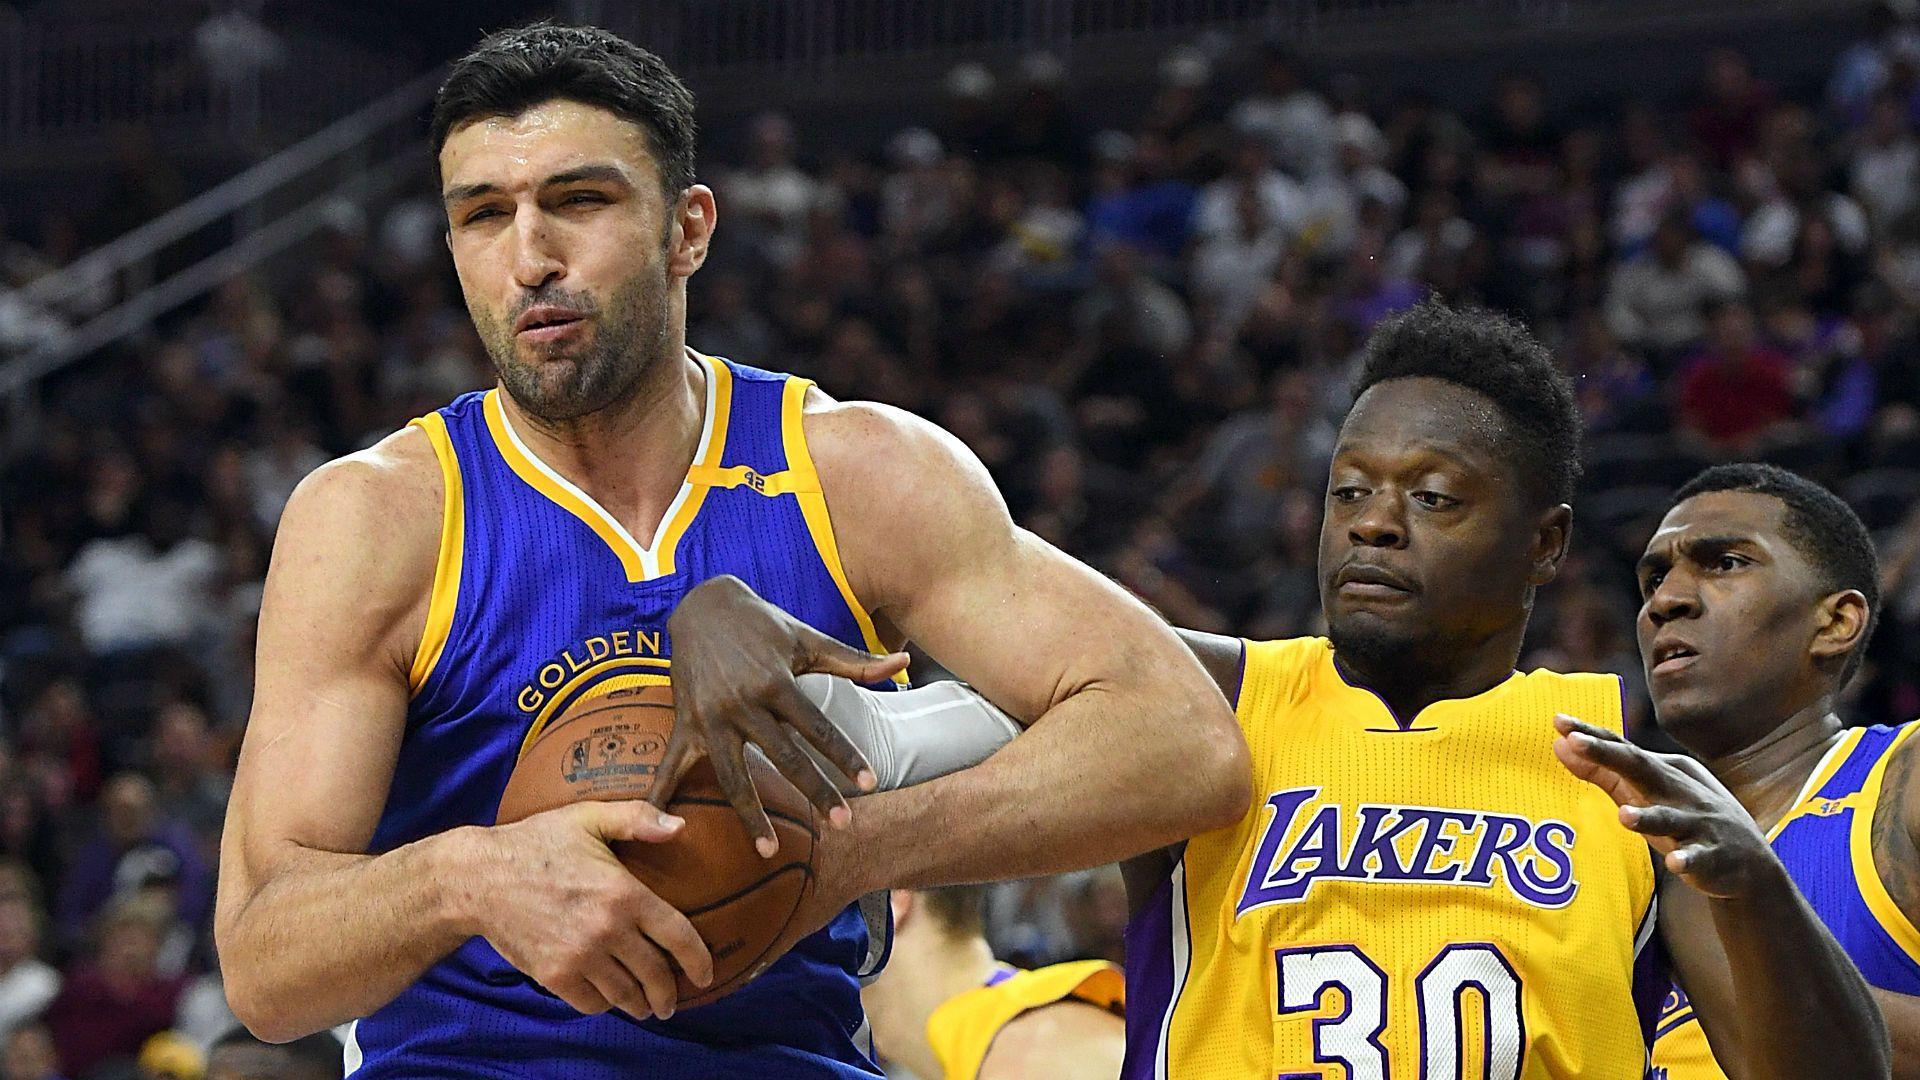 Play hard, play physical': Zaza Pachulia isn't changing his game